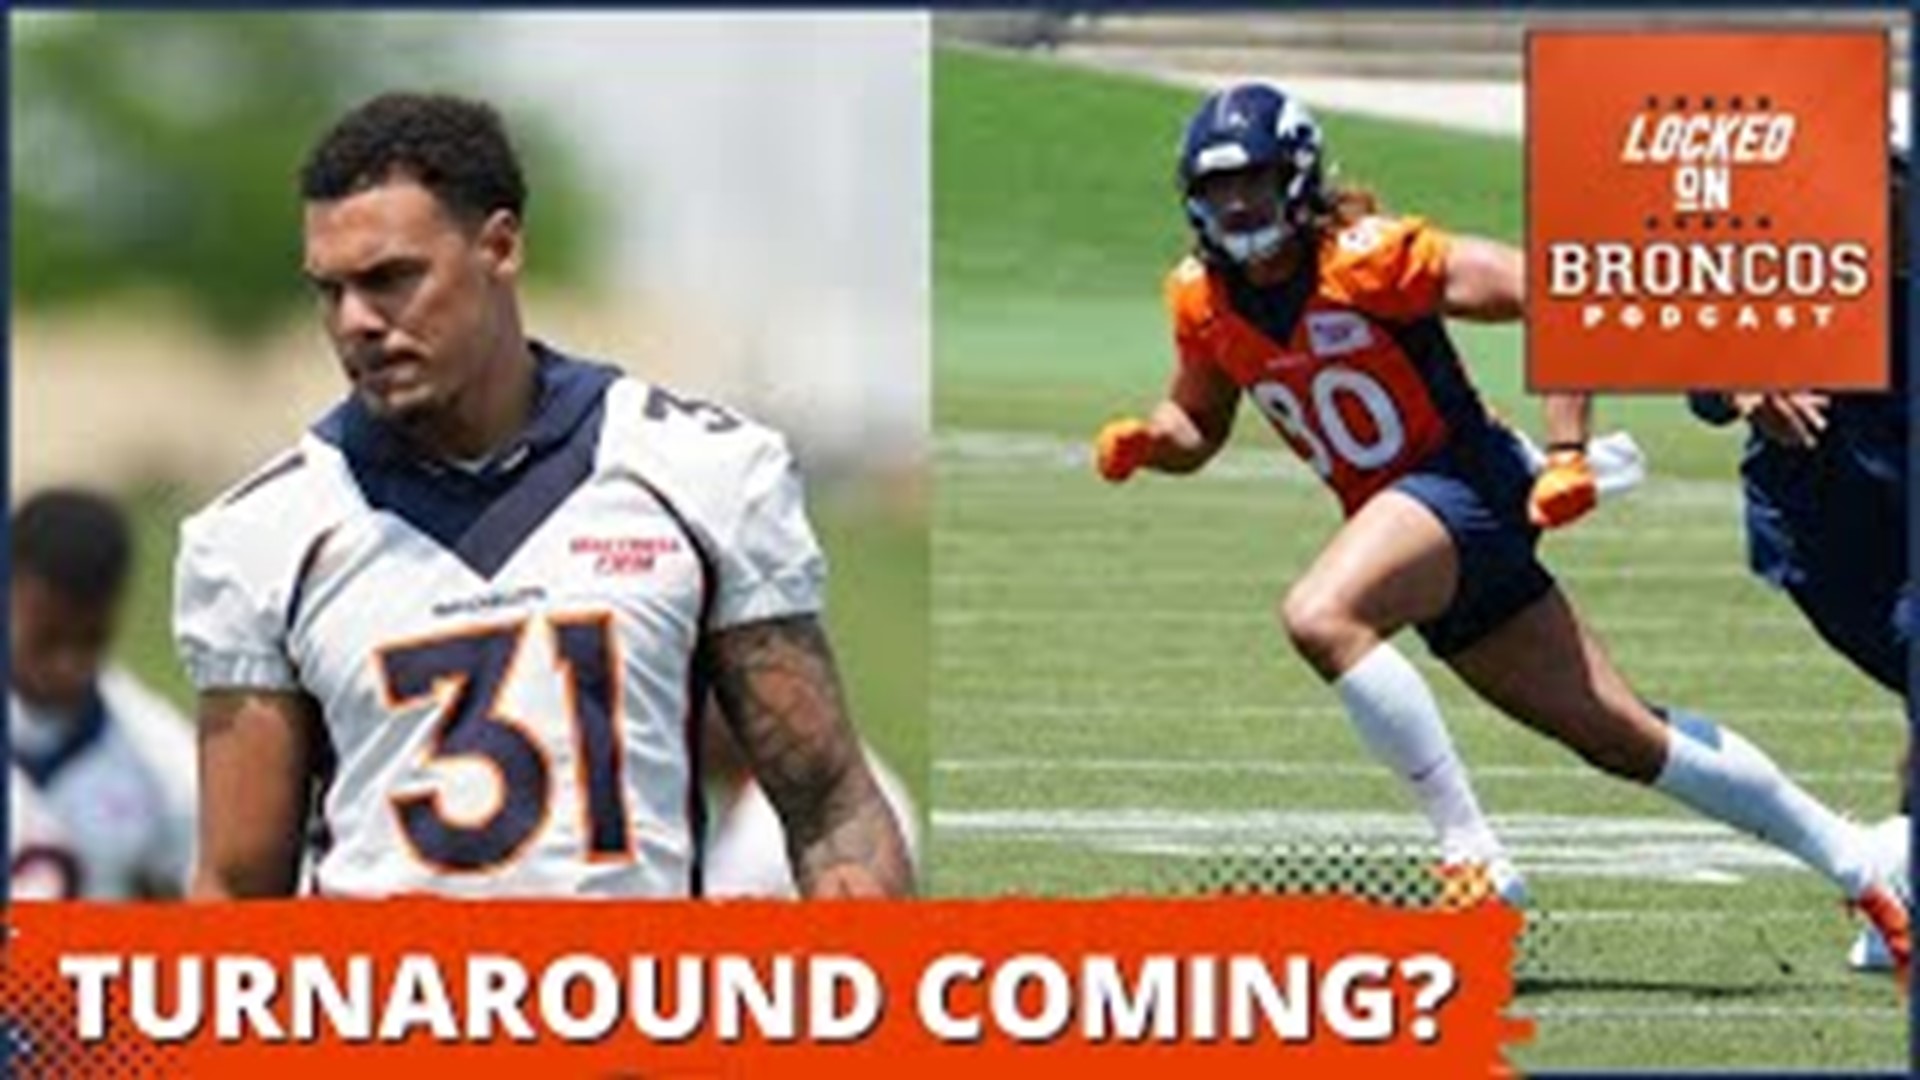 The Denver Broncos have a chance to turn their season around with Justin Simmons and Greg Dulcich potential return.